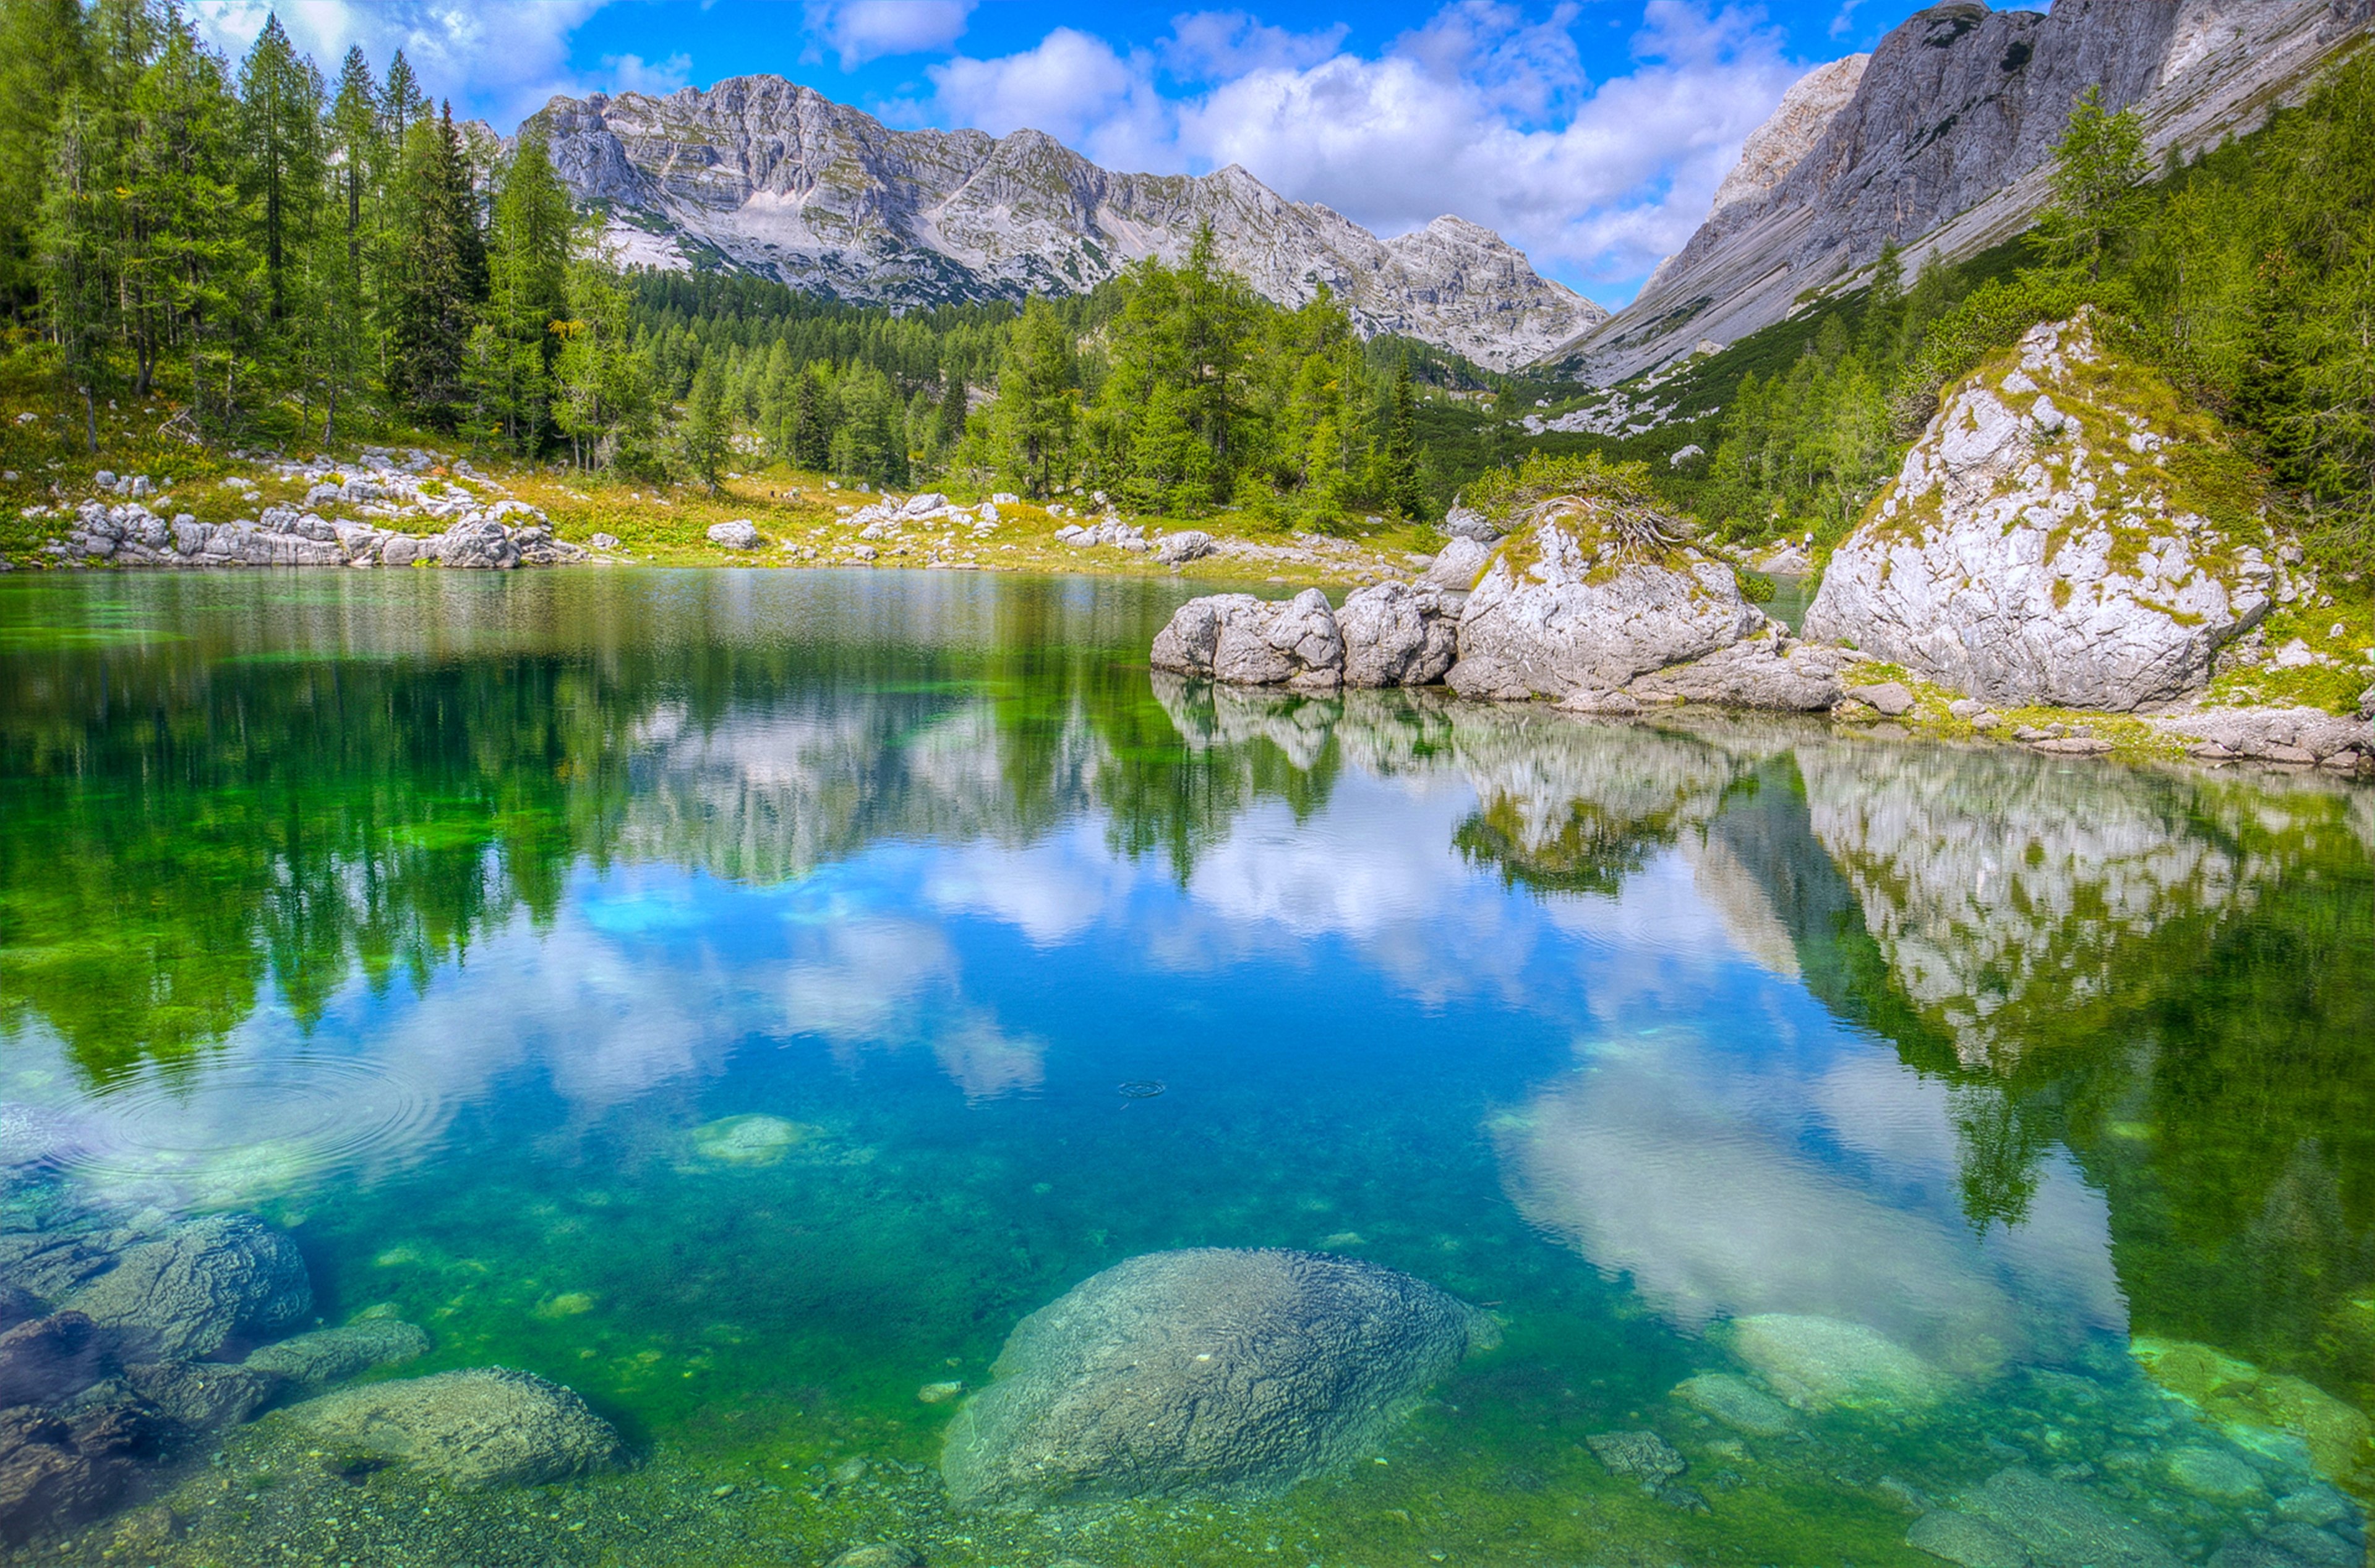 slovenia, Lakes, Stones, Rocks, Mountains, Nature, Landscapes, Trees, Sky, Clouds, Spring, Beauty, Relax, Quiet Wallpaper